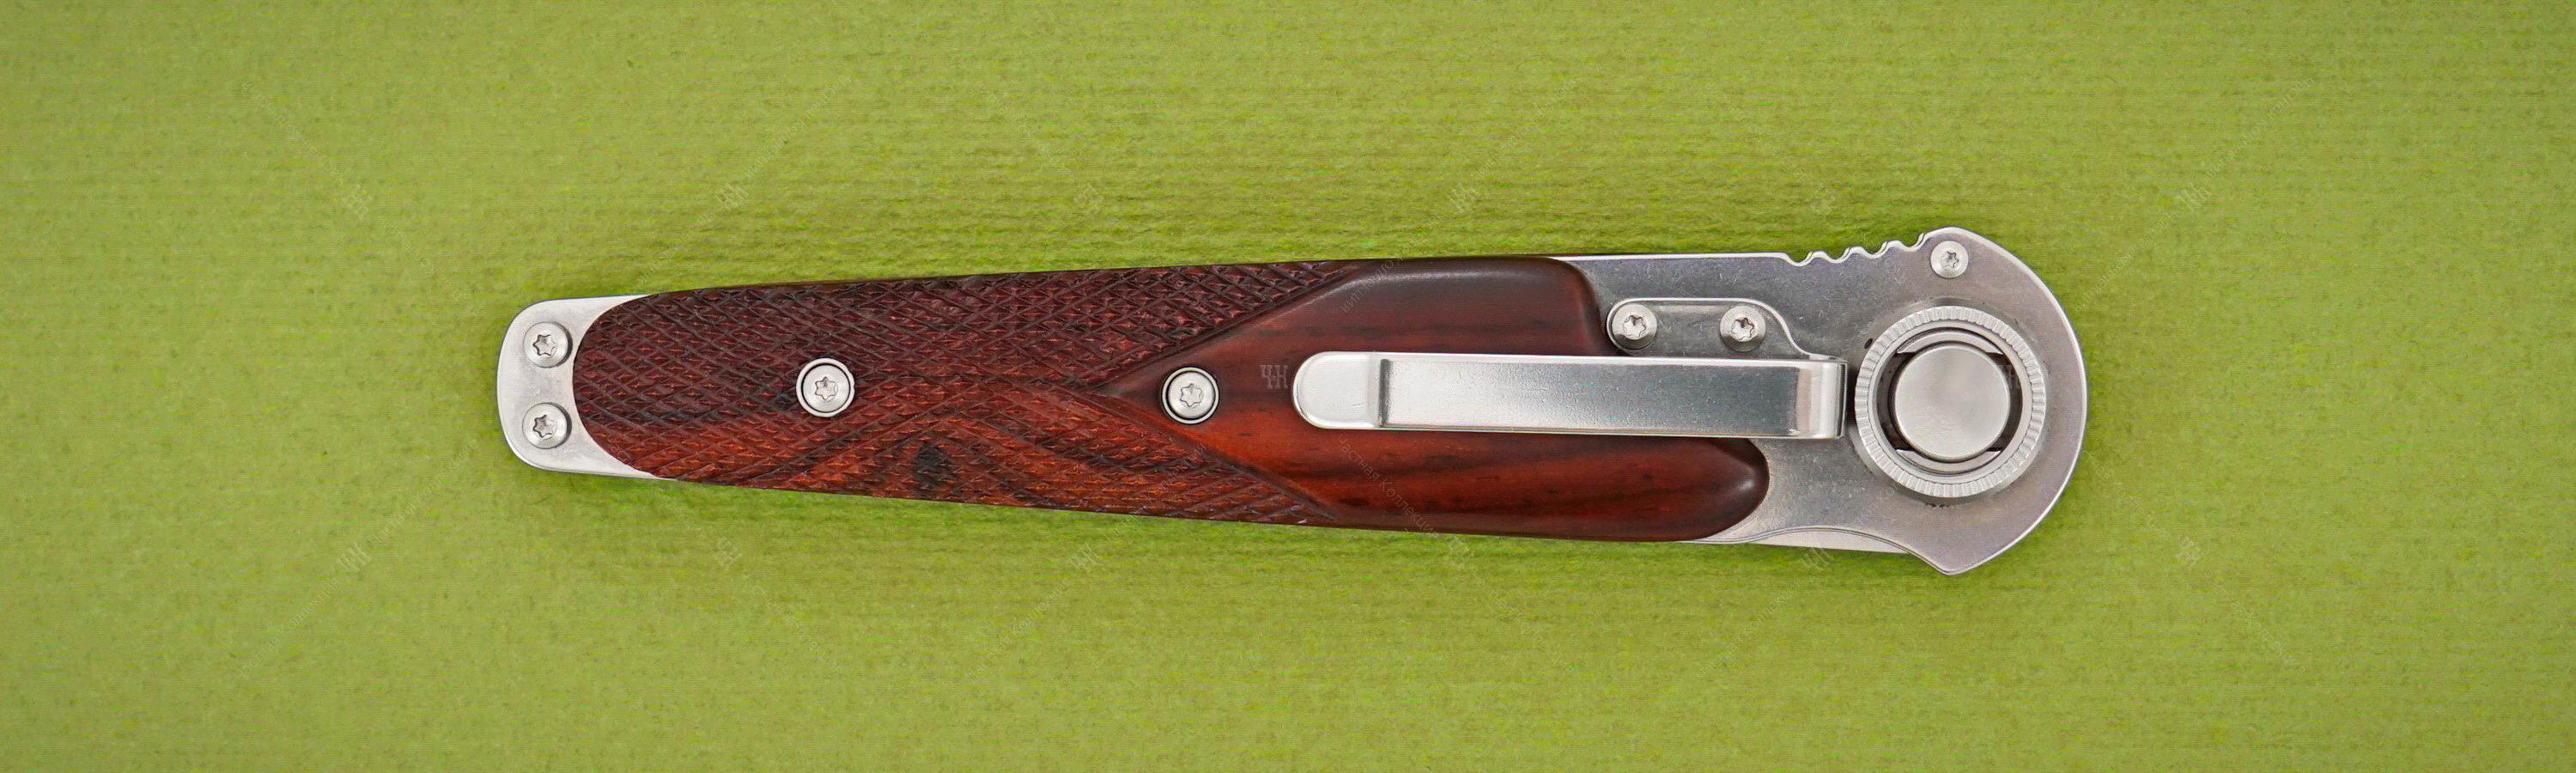 Wooden handle with stainless steel clip